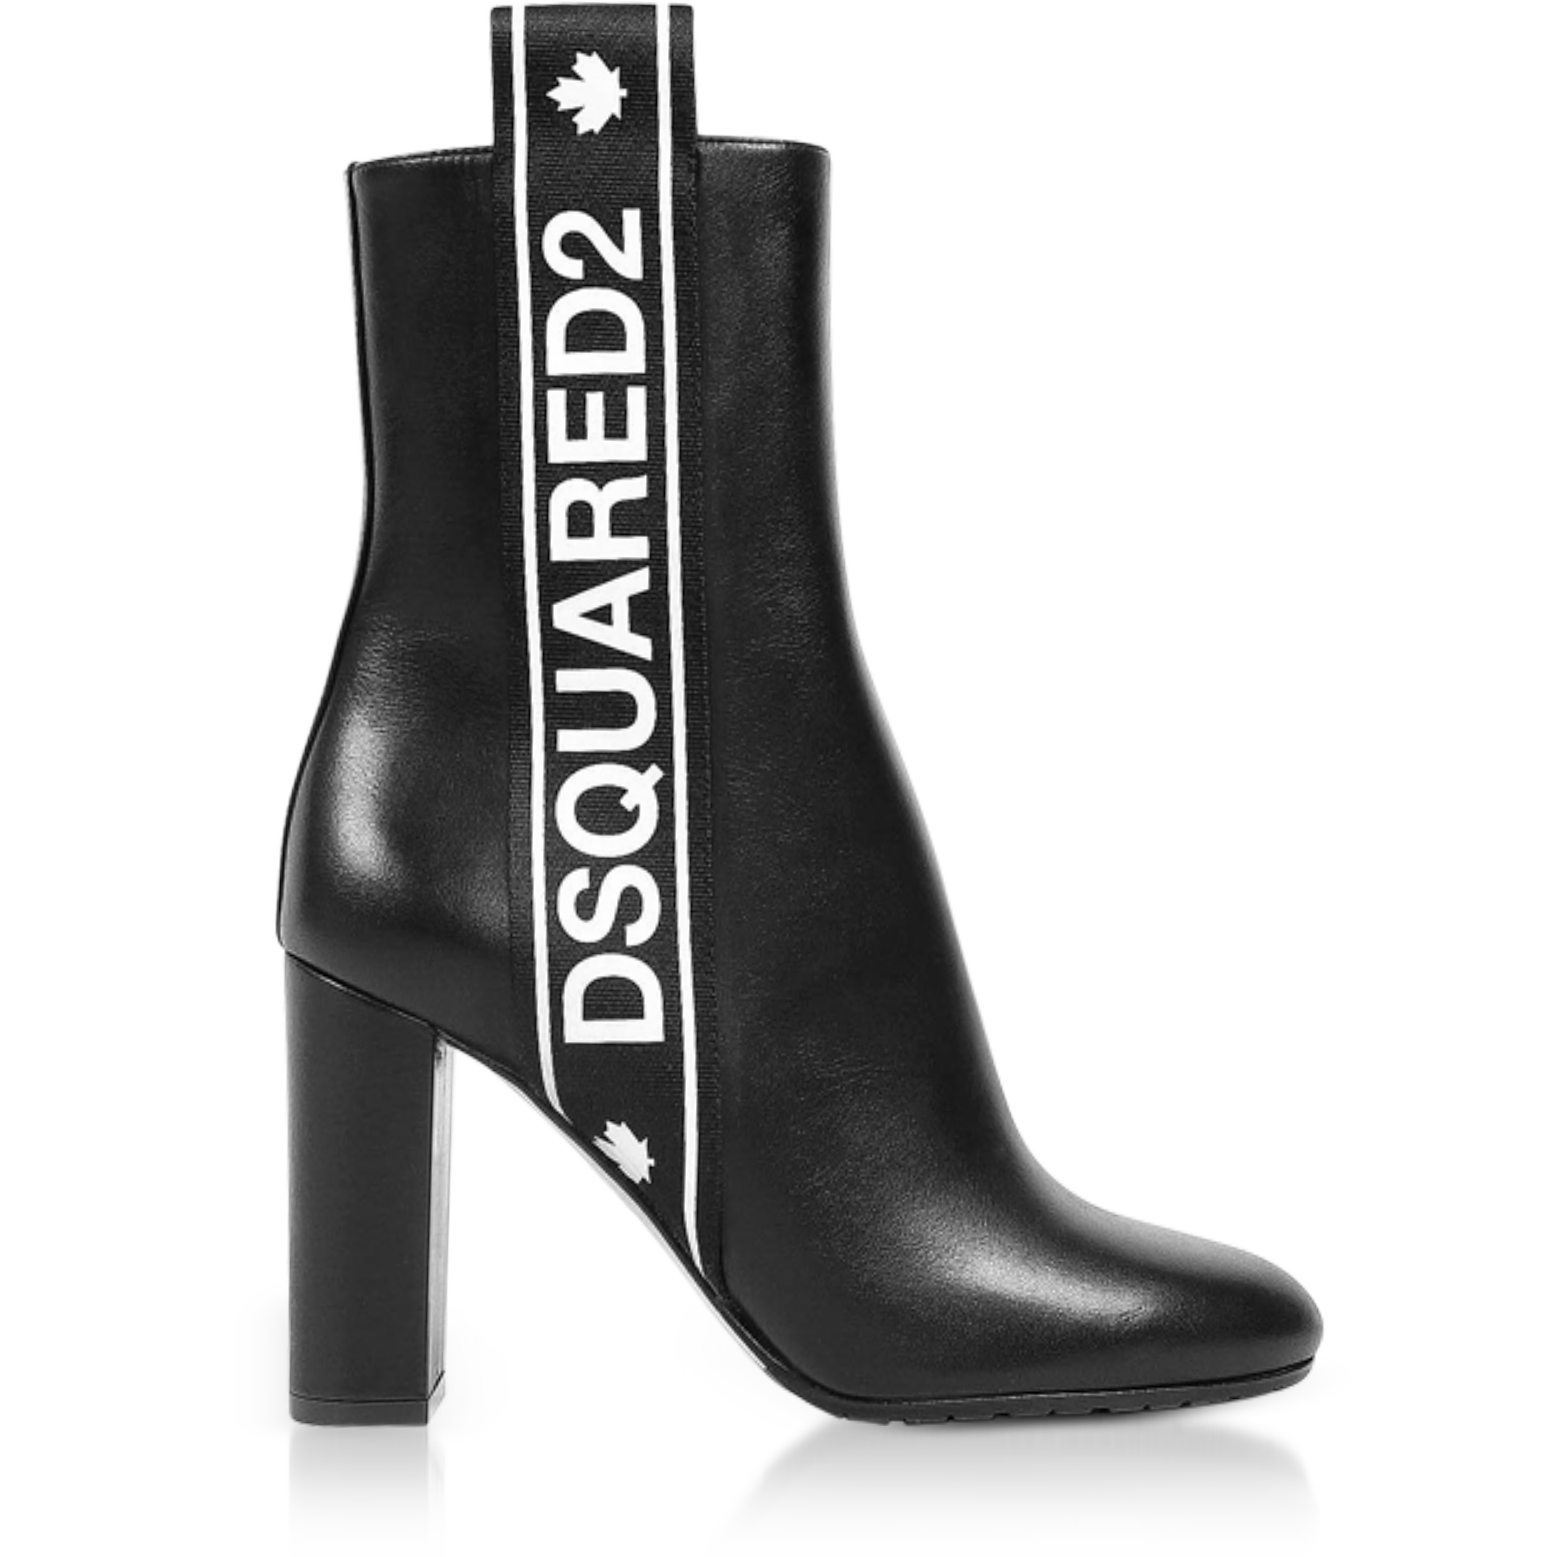 boots dsquared